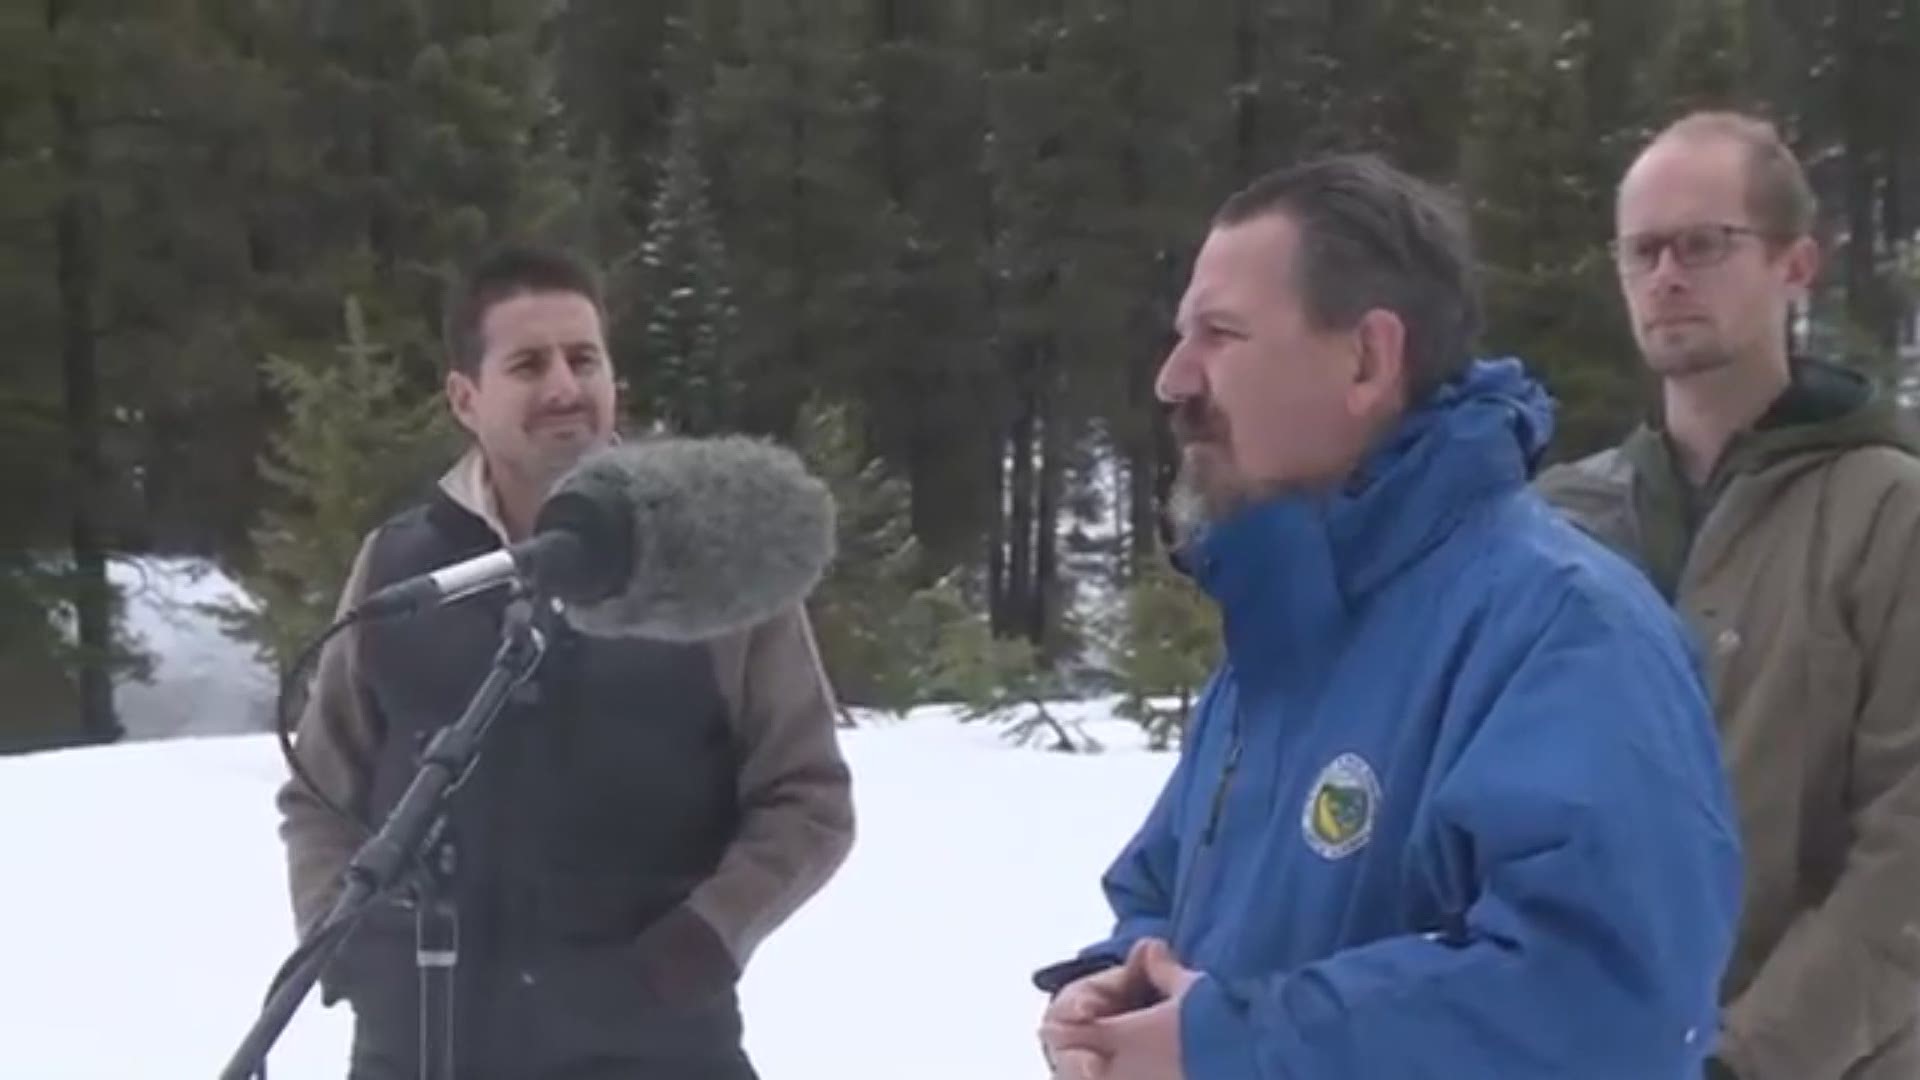 California officials say the Sierra Nevada snowpack is now 162 percent of average to date, a measurement that determines the outlook for the state's water supplies.

A measurement on a snowy Tuesday at Phillips Station near Lake Tahoe found a snow depth of 106.5 inches and a snow water equivalent of 51 inches.